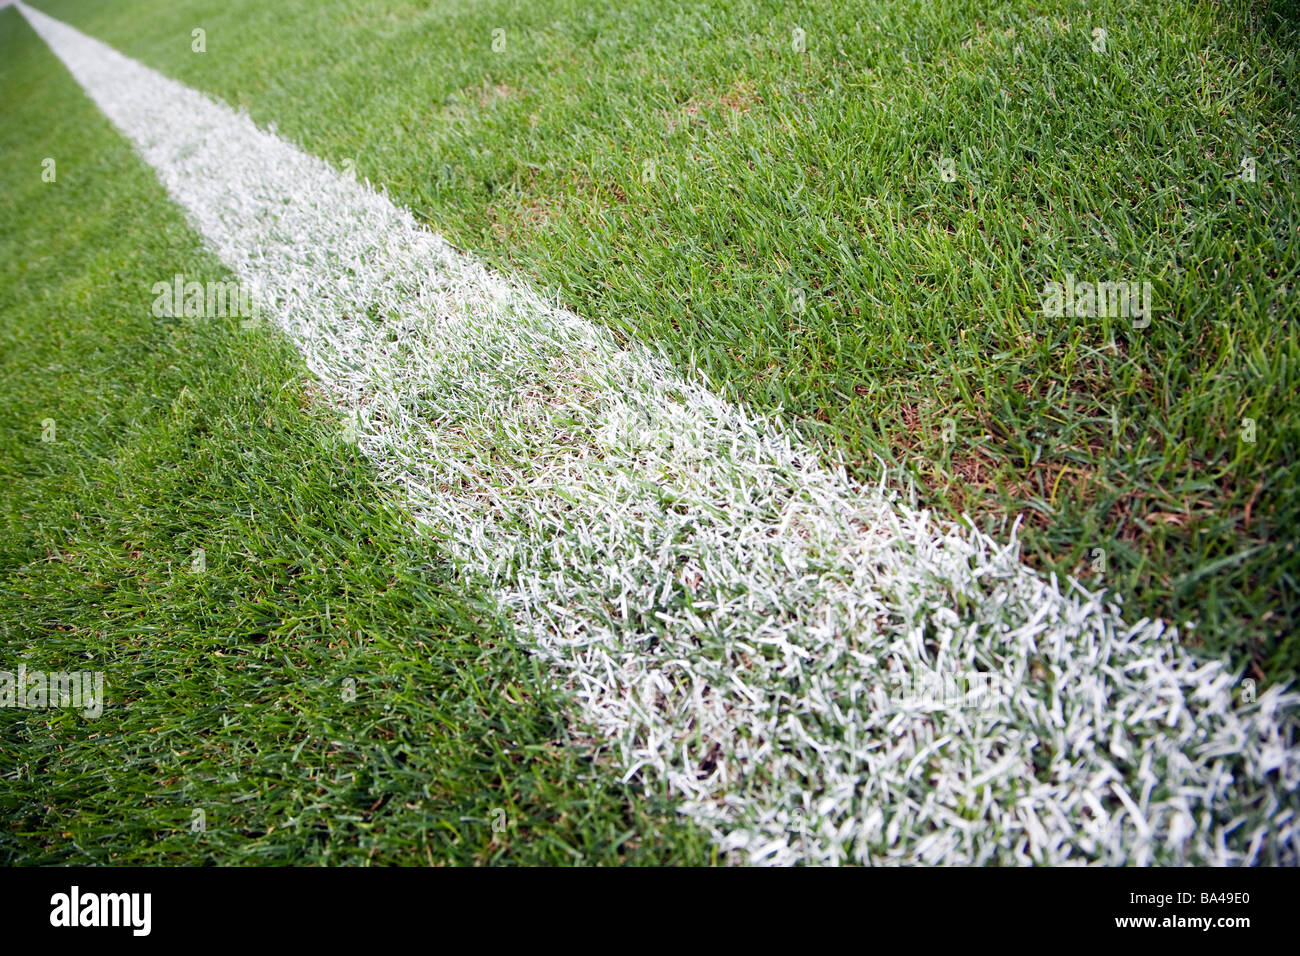 Sideline of a football field Stock Photo